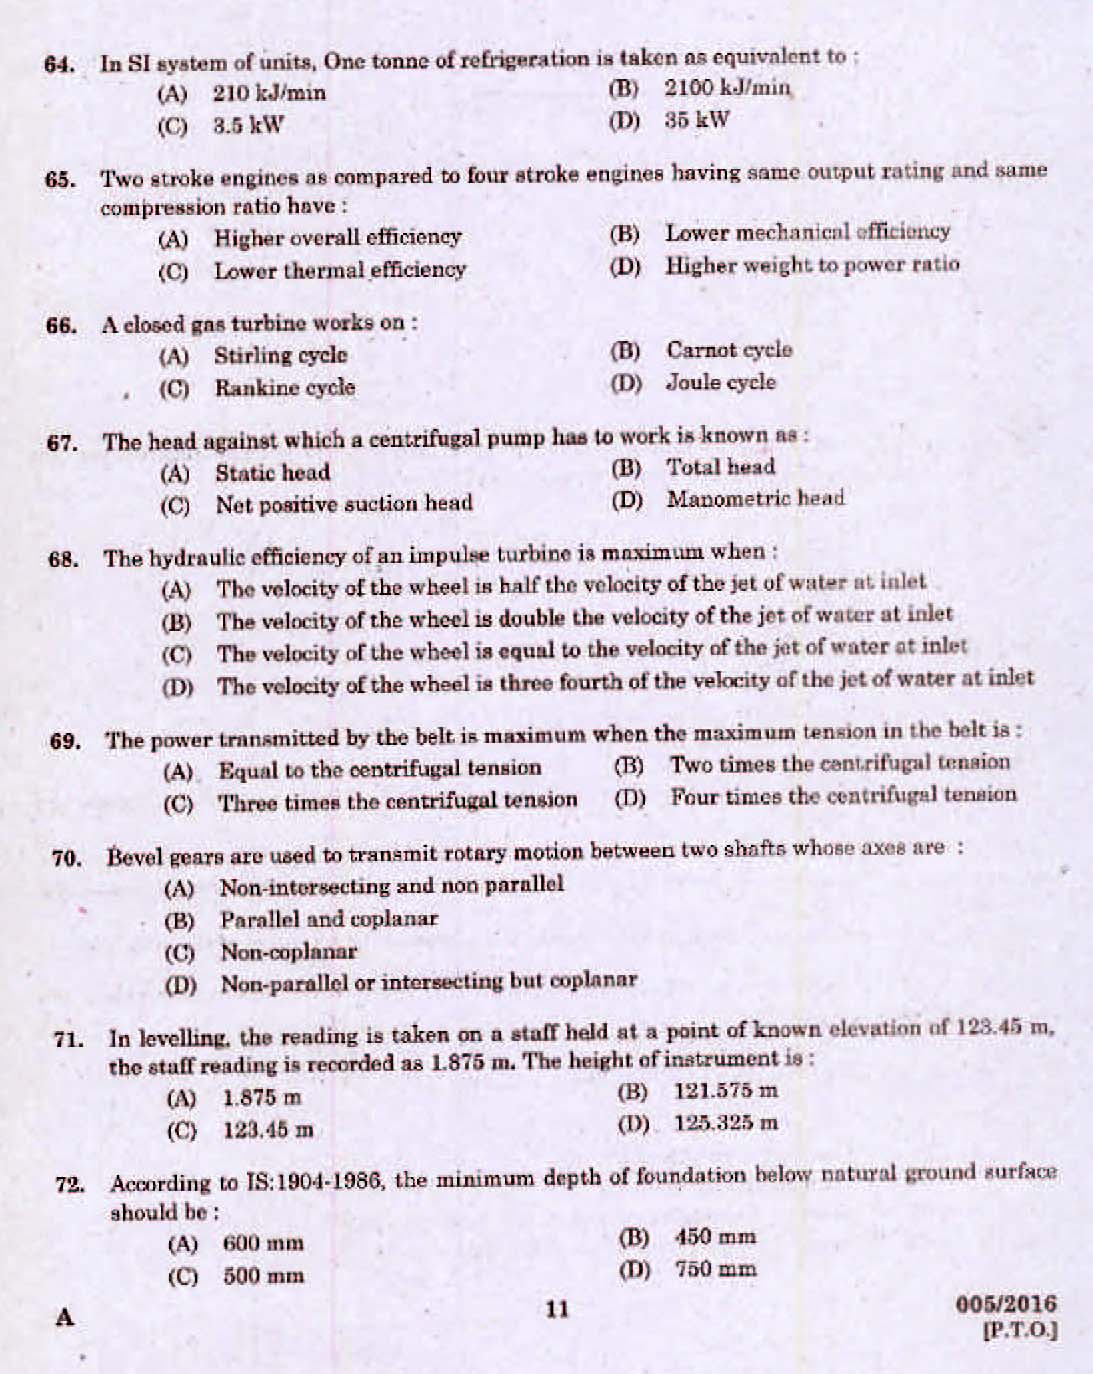 Kerala PSC Assistant Engineer Electrical Exam 2016 Question Paper Code 0052016 9